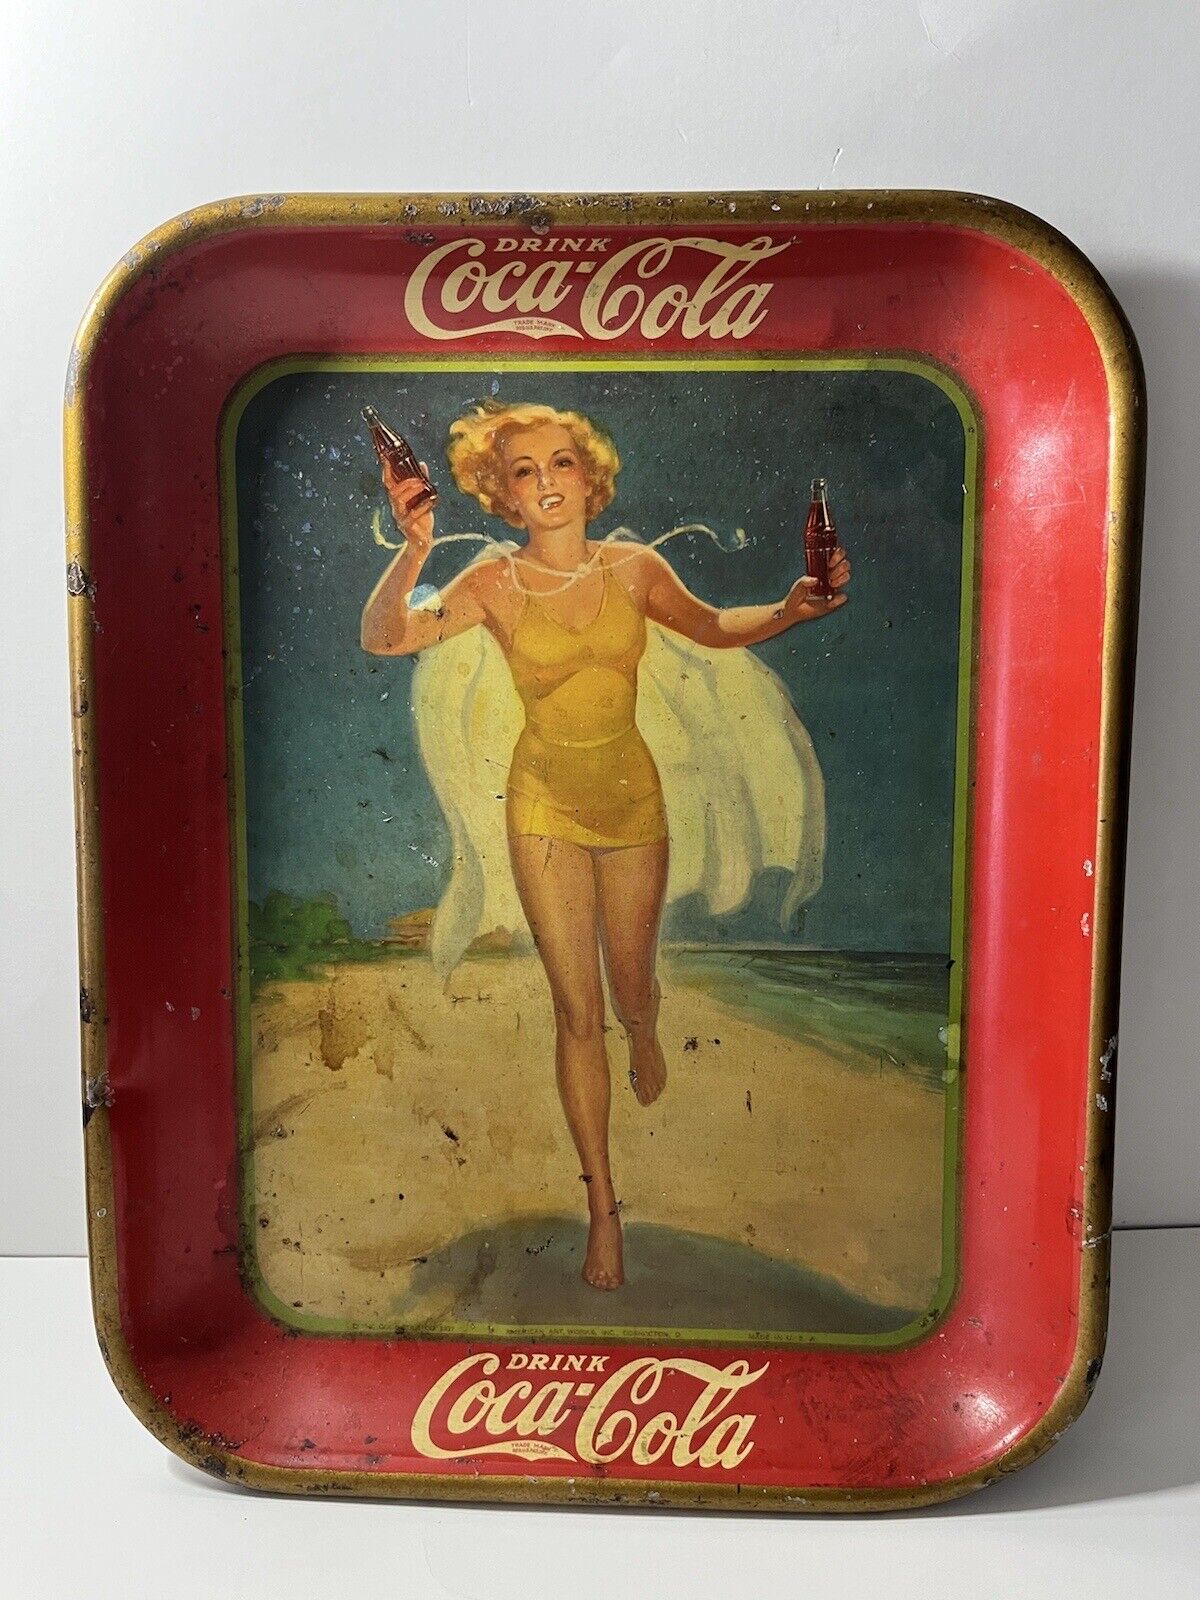 VINTAGE 1937 COCA COLA ADVERTISING TRAY RUNNING GIRL IN YELLOW BATHING SUIT